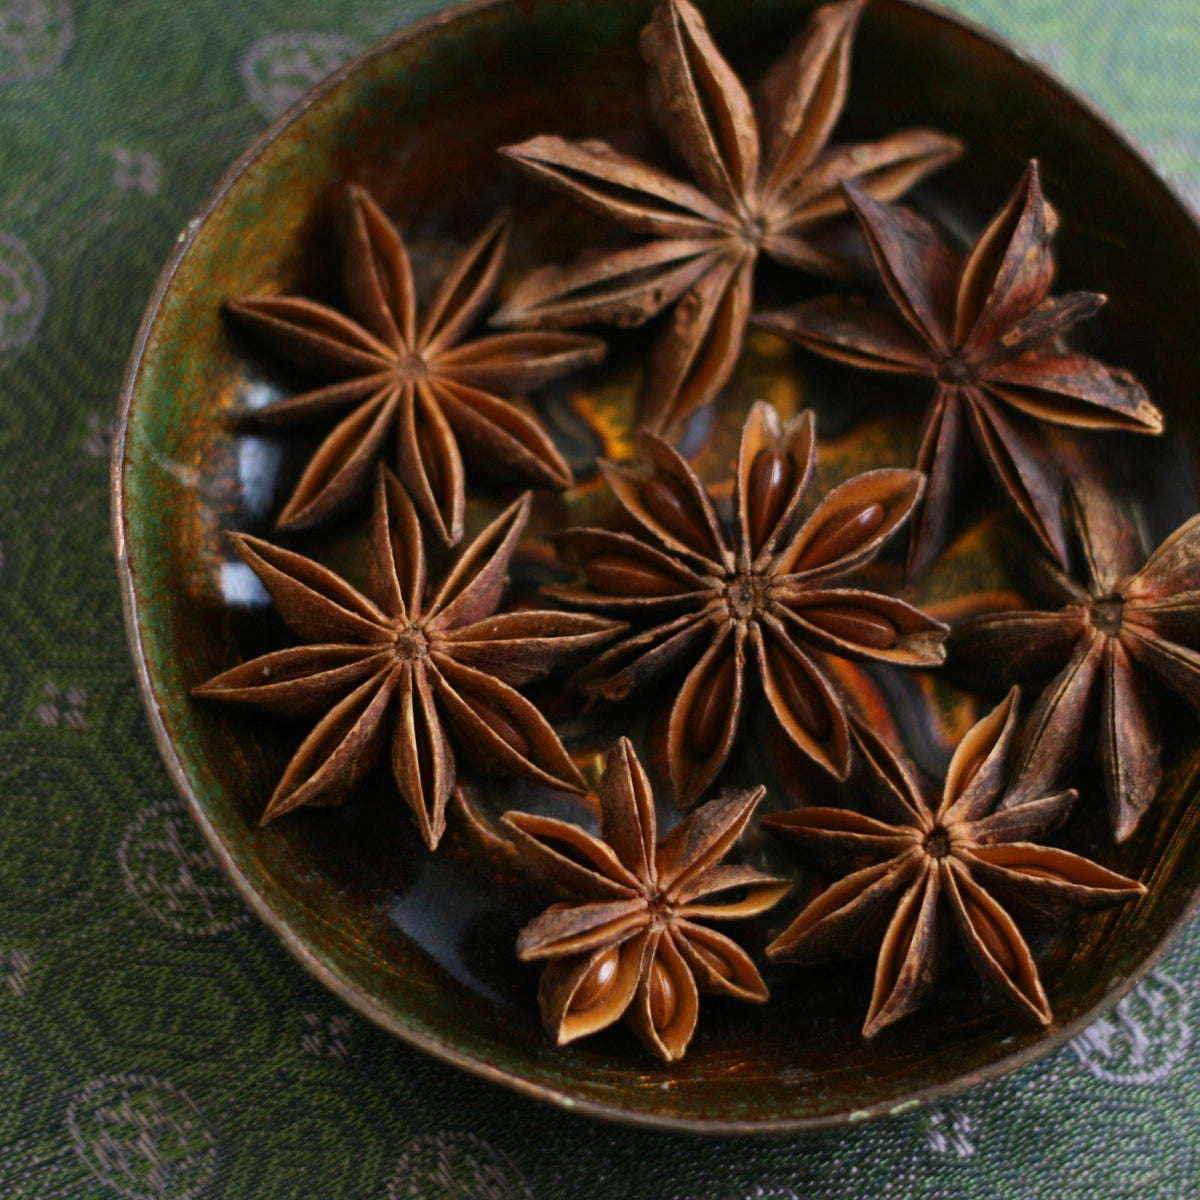 Star Anise (accounts only)